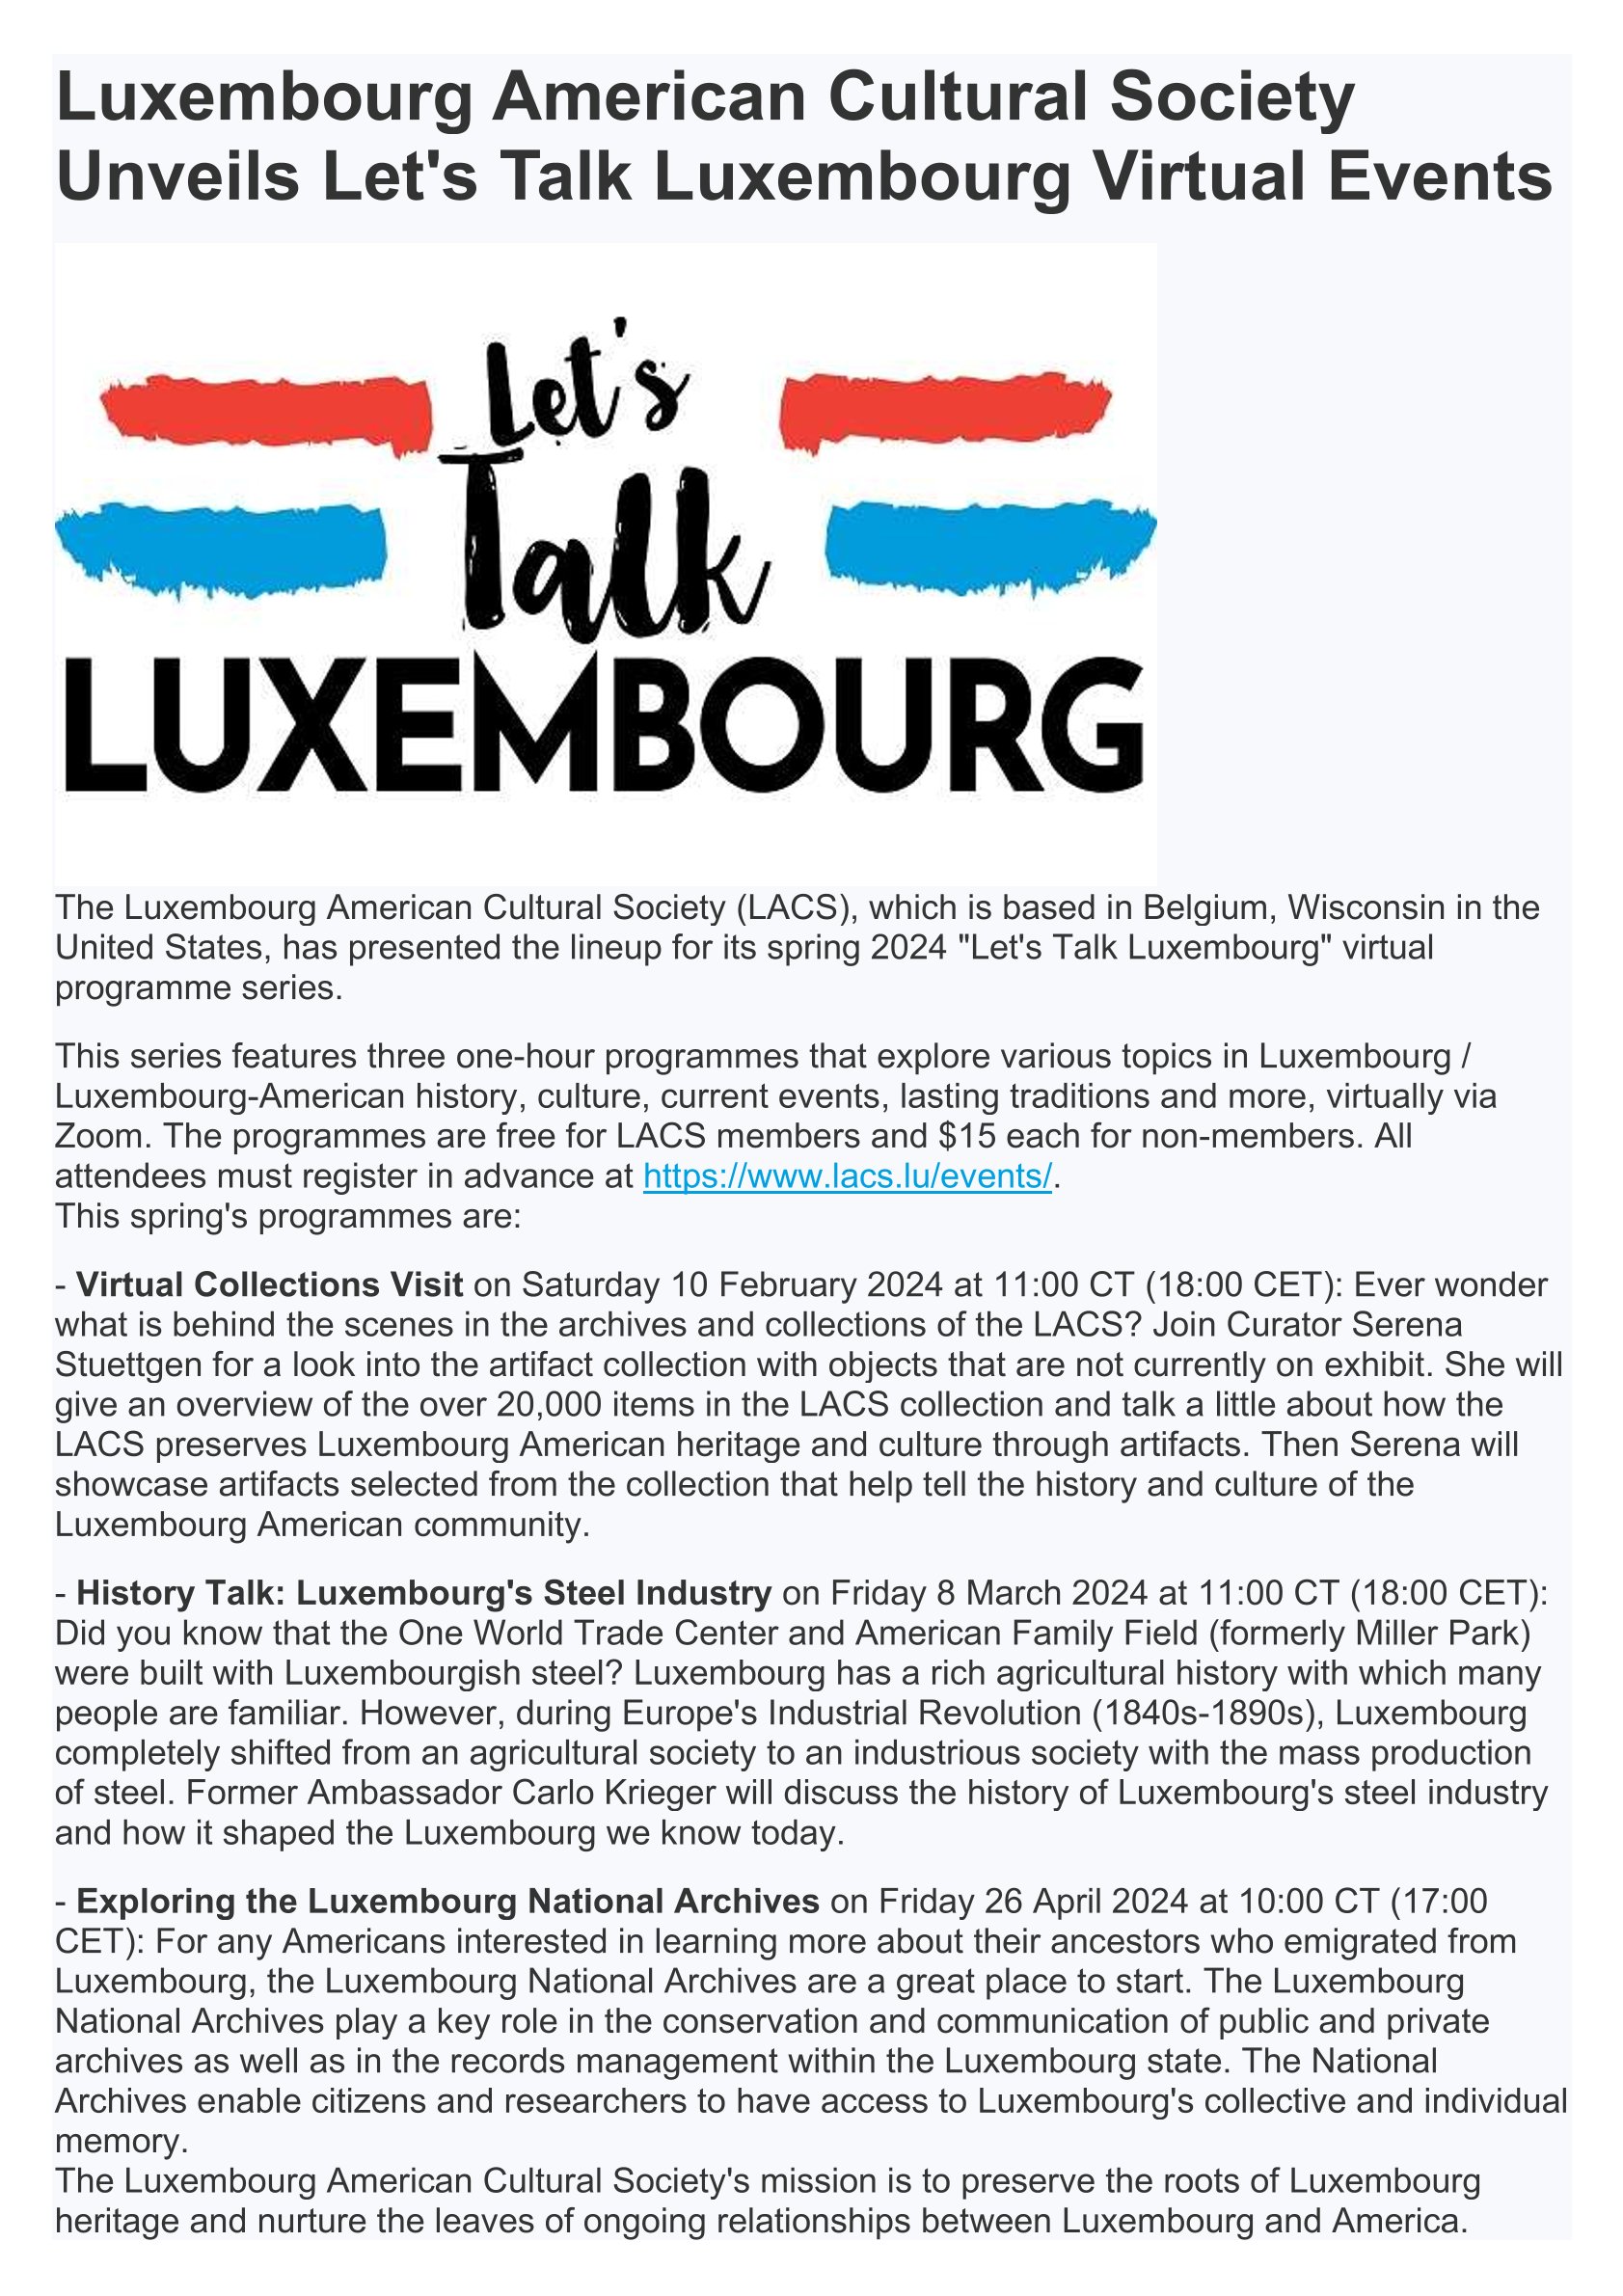 Let's talk Luxembourg